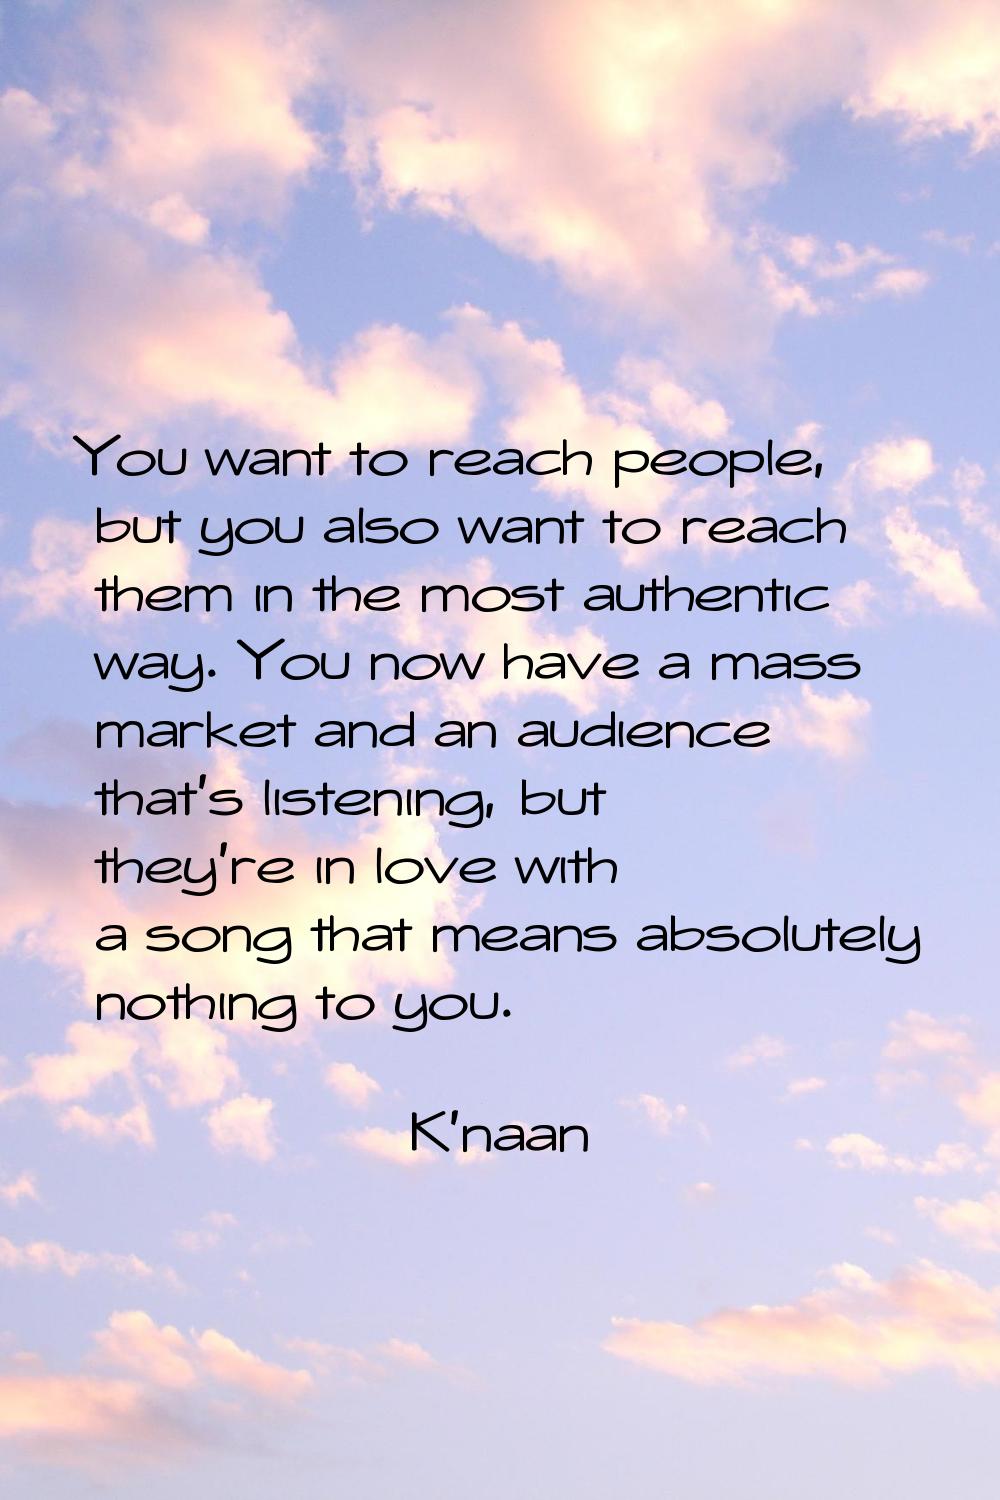 You want to reach people, but you also want to reach them in the most authentic way. You now have a